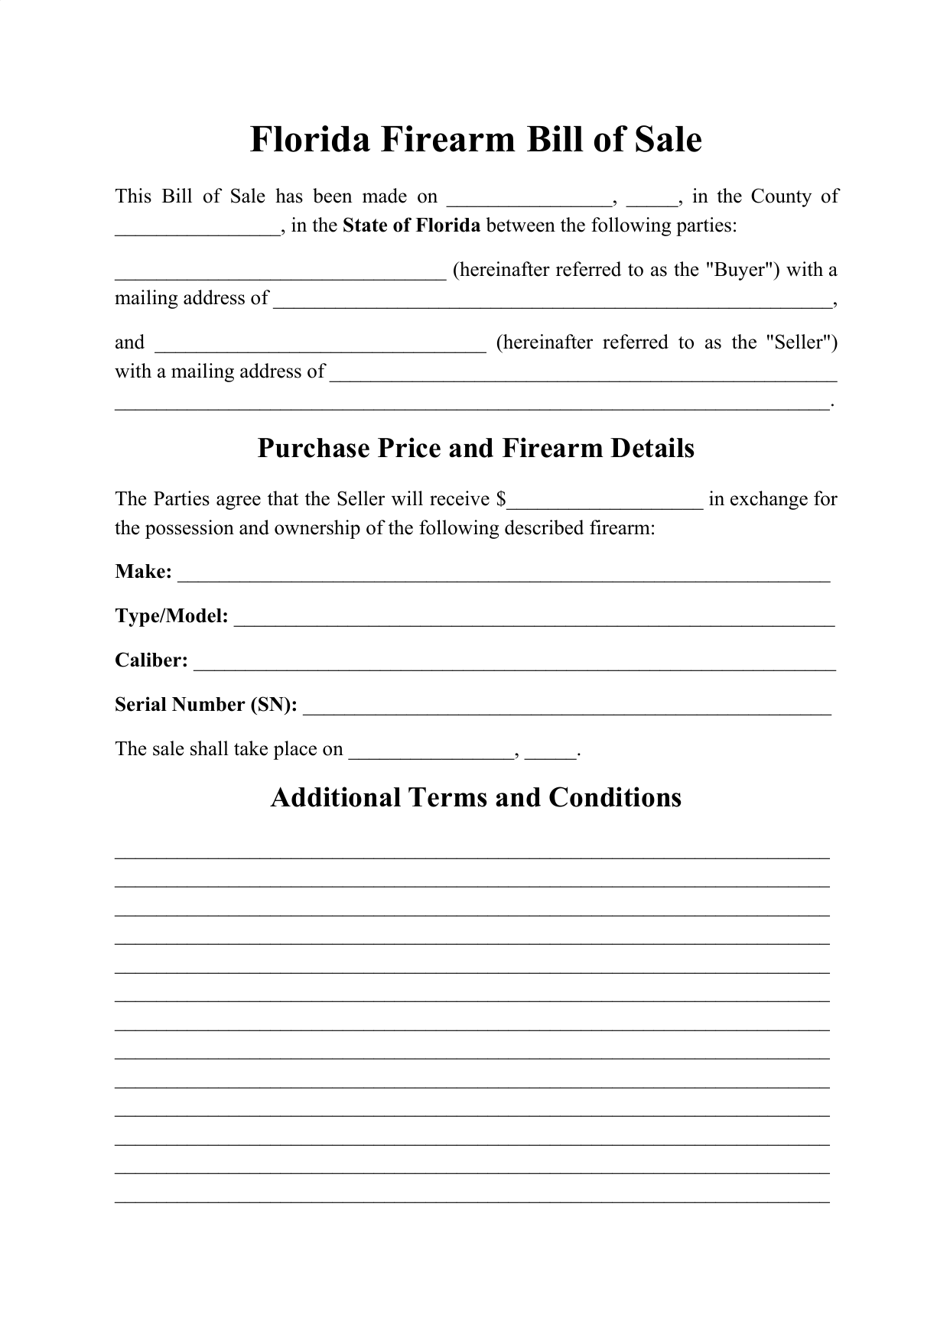 Florida Firearm Bill of Sale Form Fill Out, Sign Online and Download